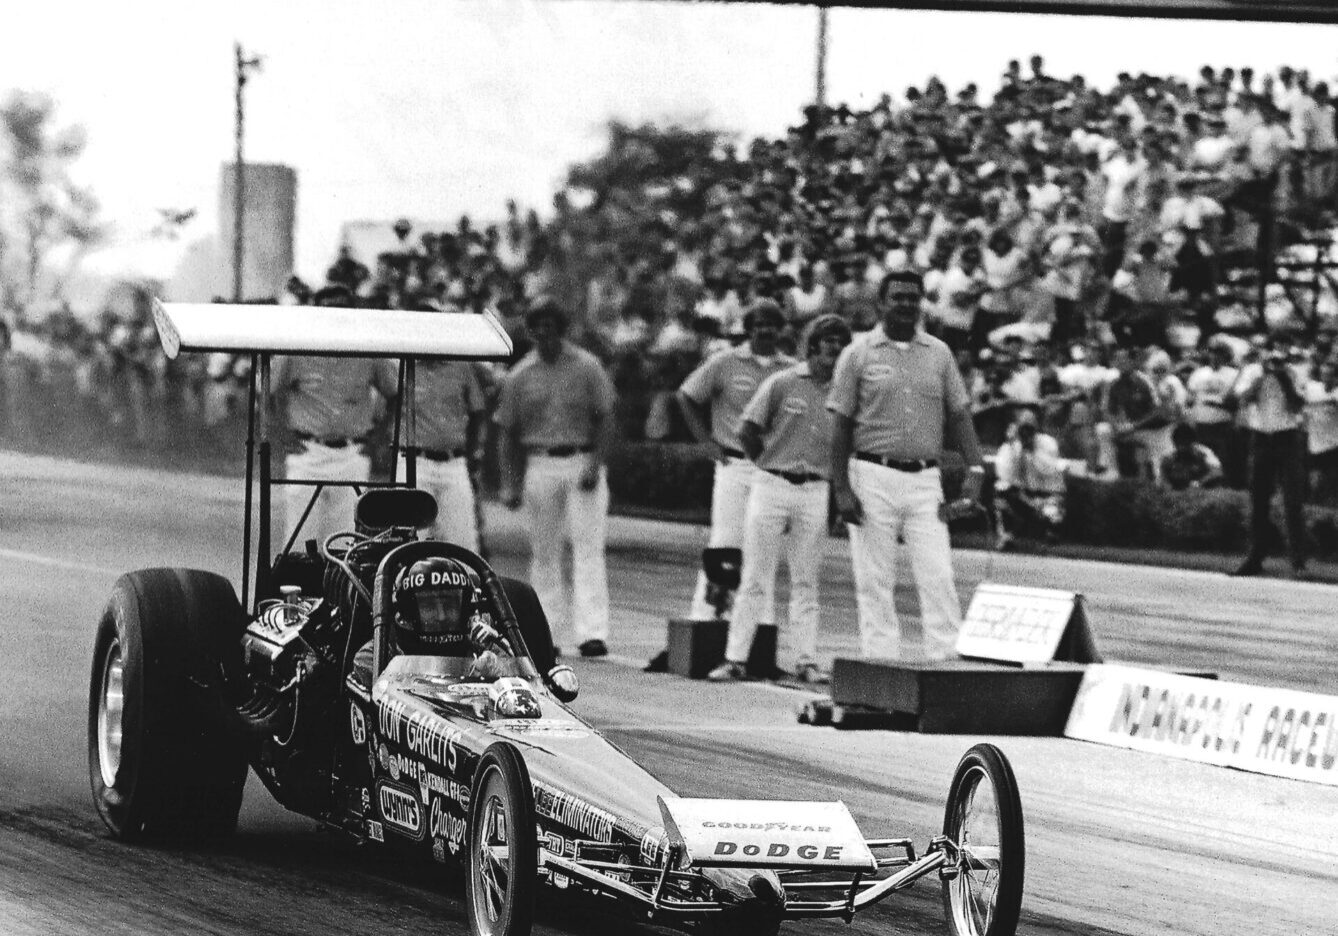 Built in 1970 following Don’s racing accident in Long Beach, California in which he lost part of his right foot in a slingshot dragster.  Don, Connie Swingle and Tom Lemons built this famous Swamp Rat car at Seffner, Florida.  Don was ridiculed, called crazy, and drivers refused to qualify next to the car when it was debuted, at the same race on year later, in Long Beach. Don would have the last laugh as the car won 6 national events, including the NHRA opening event WInternationals. Swamp Rat 14 would lead to the extinction of the Slingshot dragster by the end of 1972. Swamp Rat 14 had a top speed of 244 MPH and a 6.21 ET.
